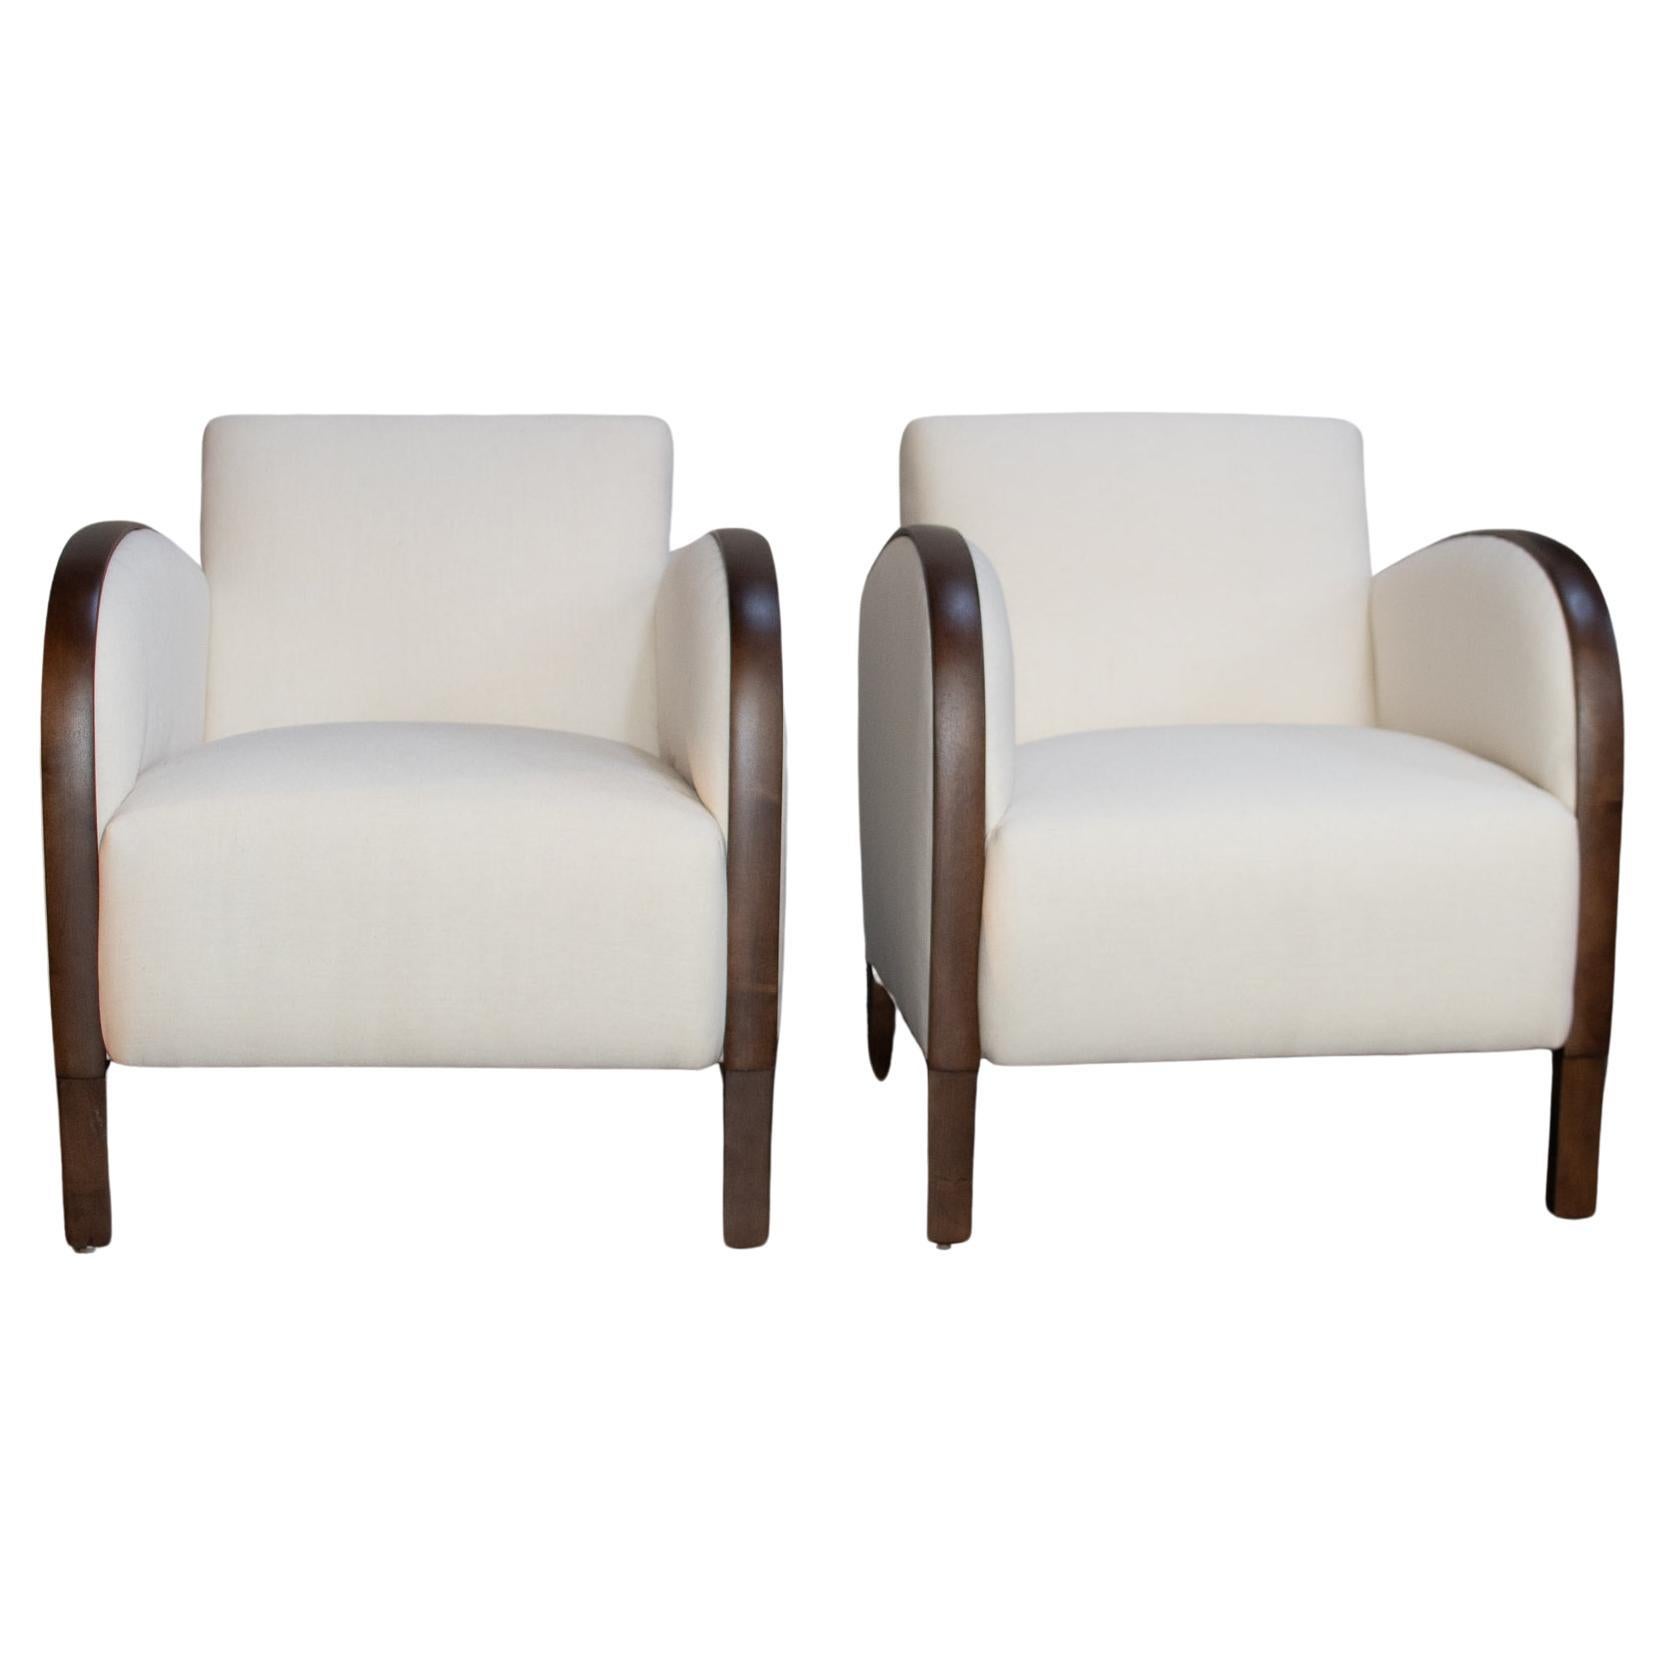 Pair of Swedish Period Vintage Art Deco Lounge Chairs - COM Ready 